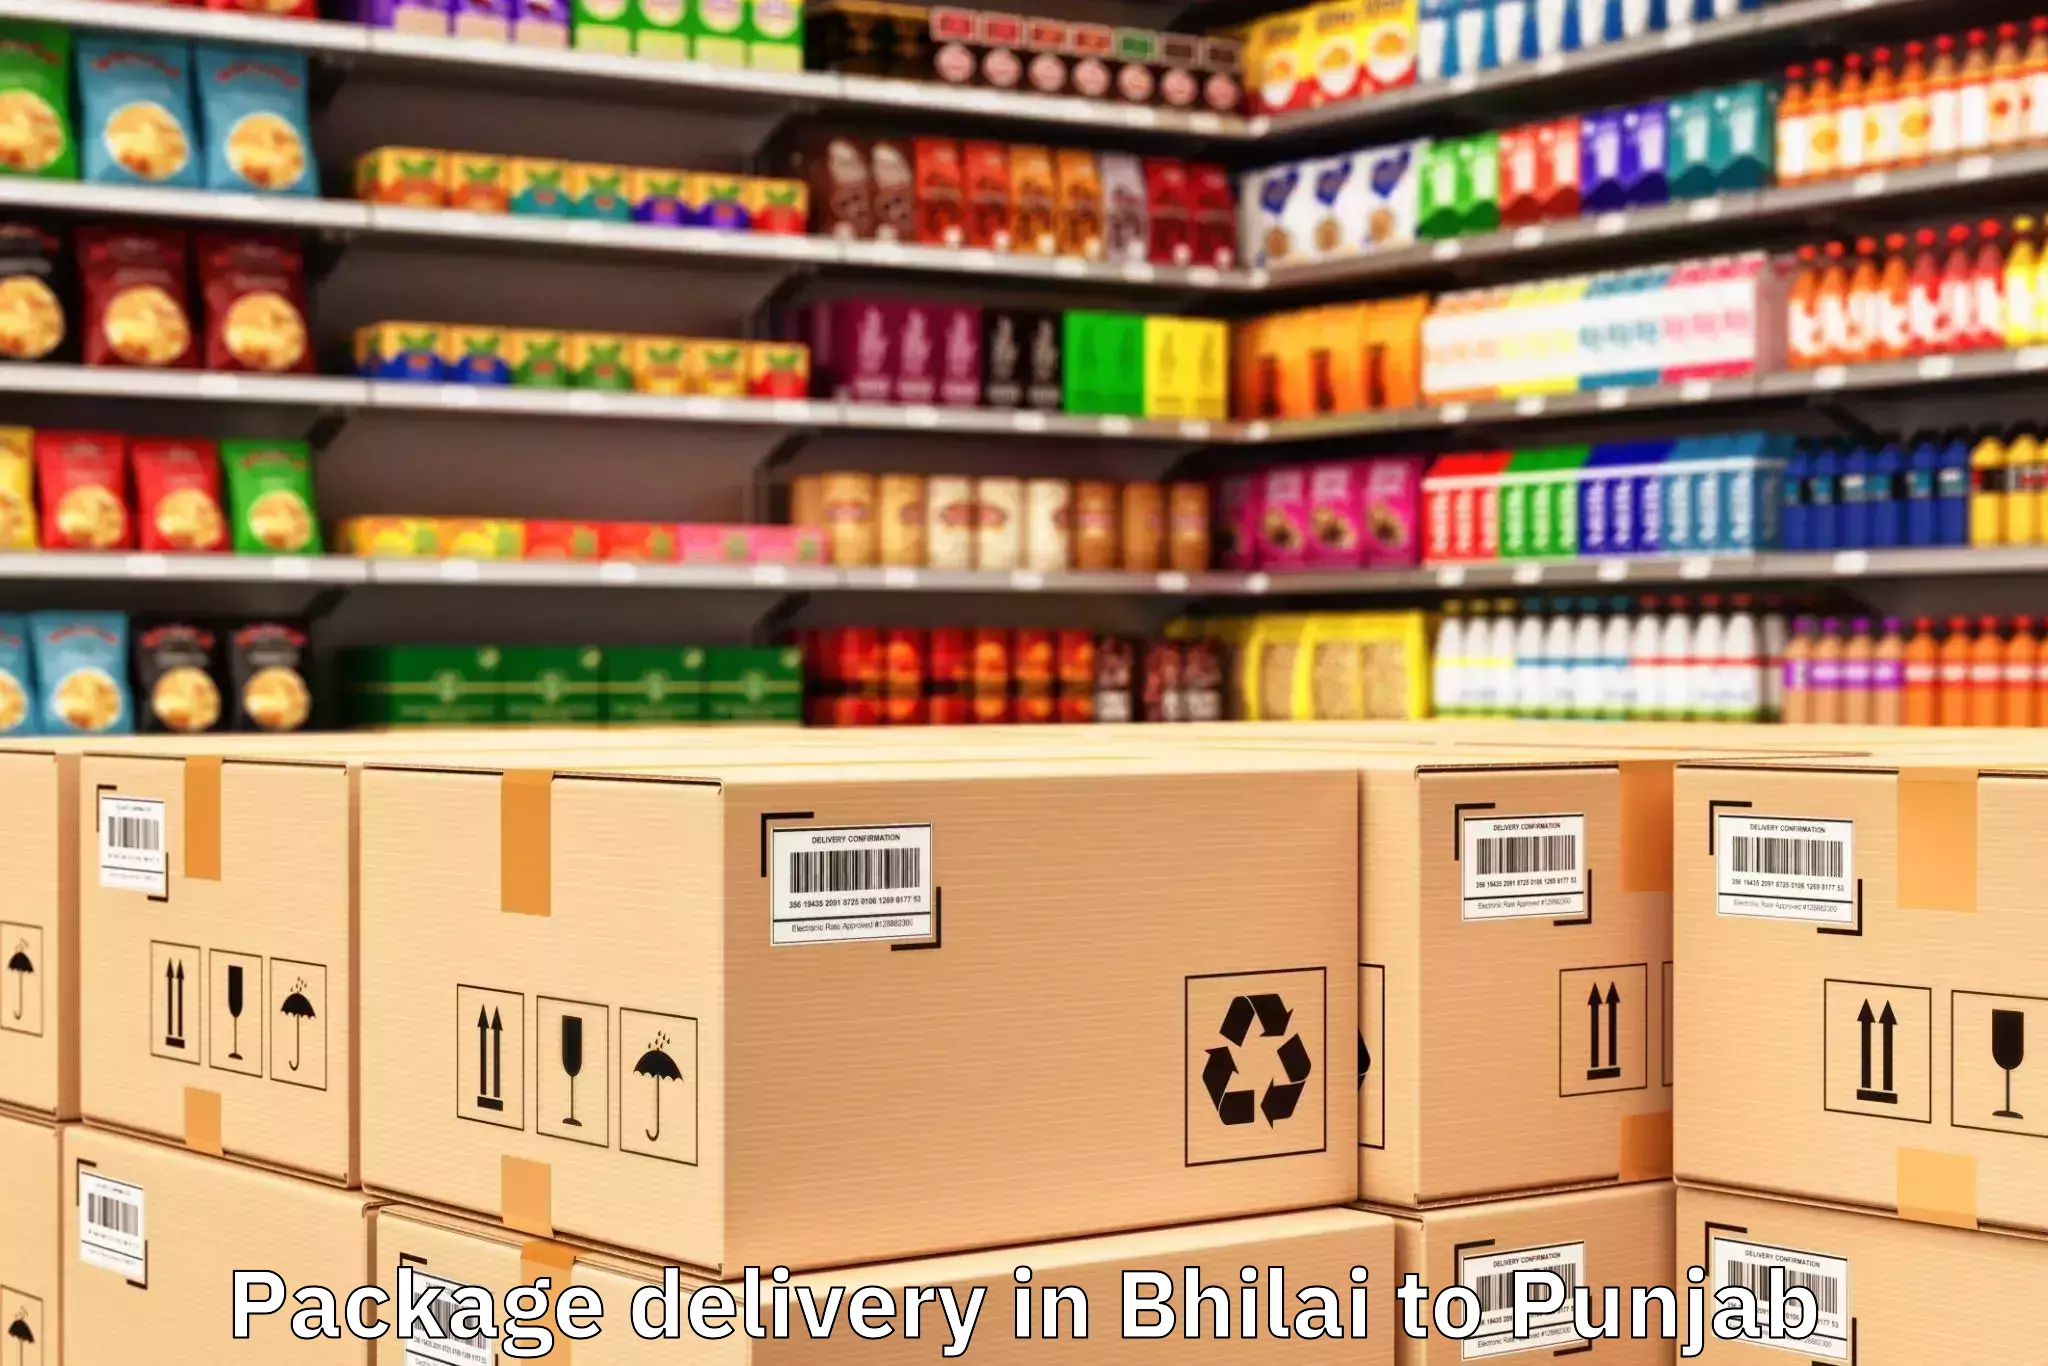 Bhilai to Punjab Package Delivery